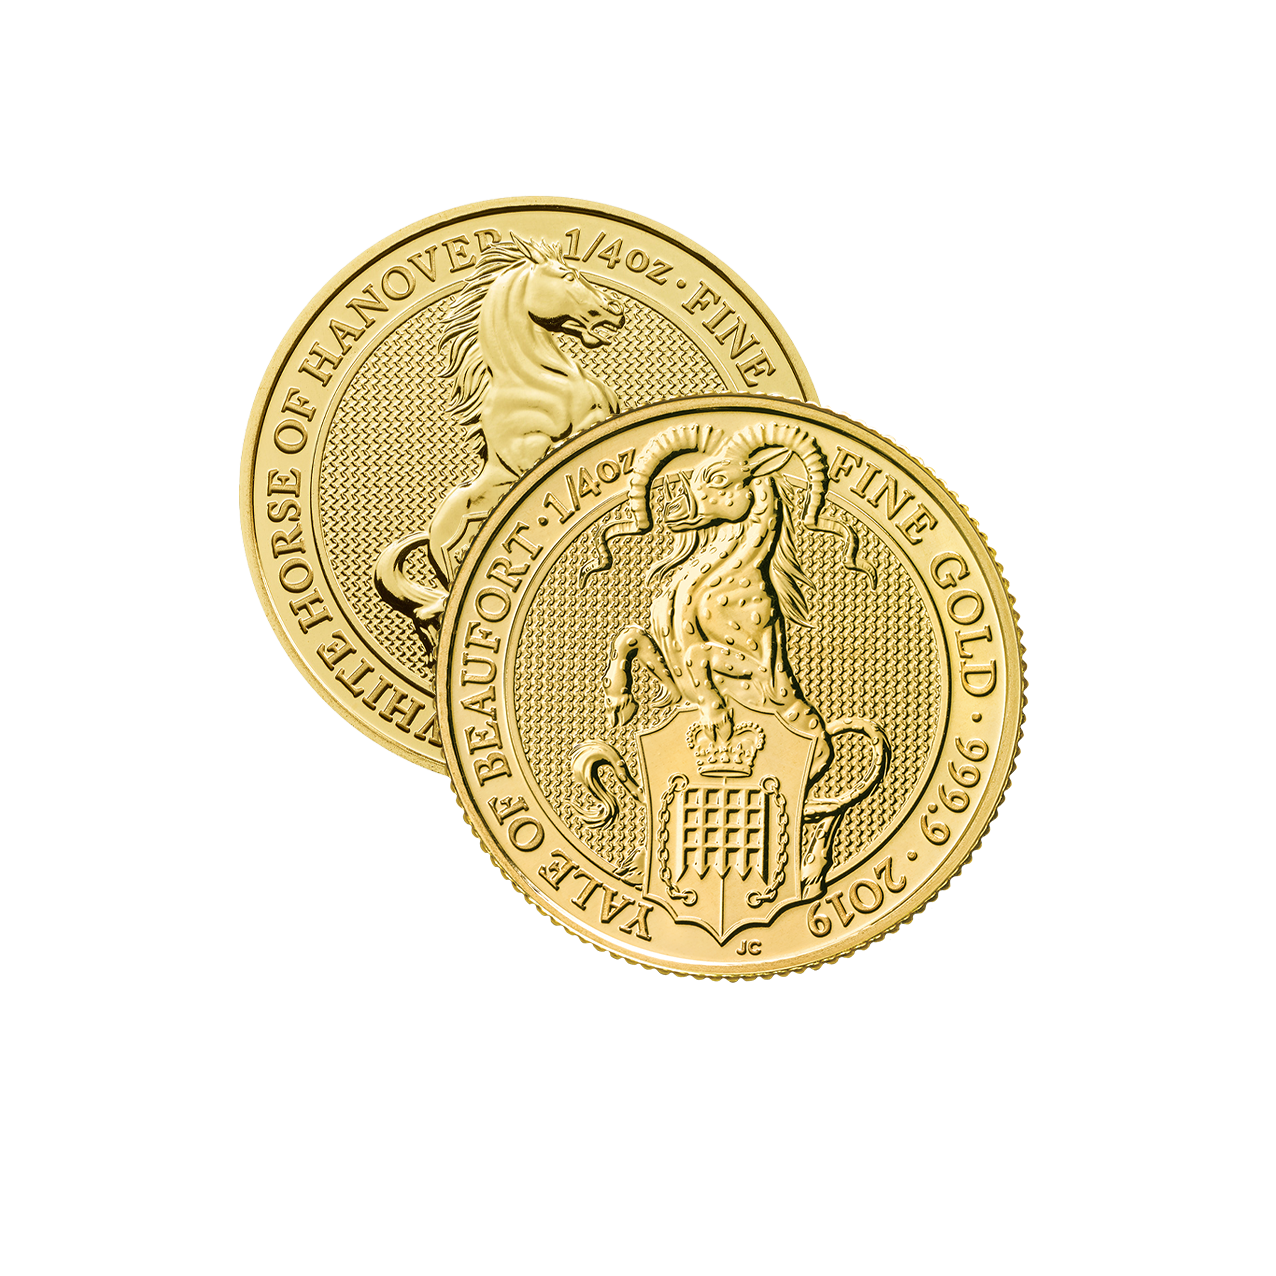 The Queens Beasts "alle motifs" - United Kingdom 1/4 oz goldcoin